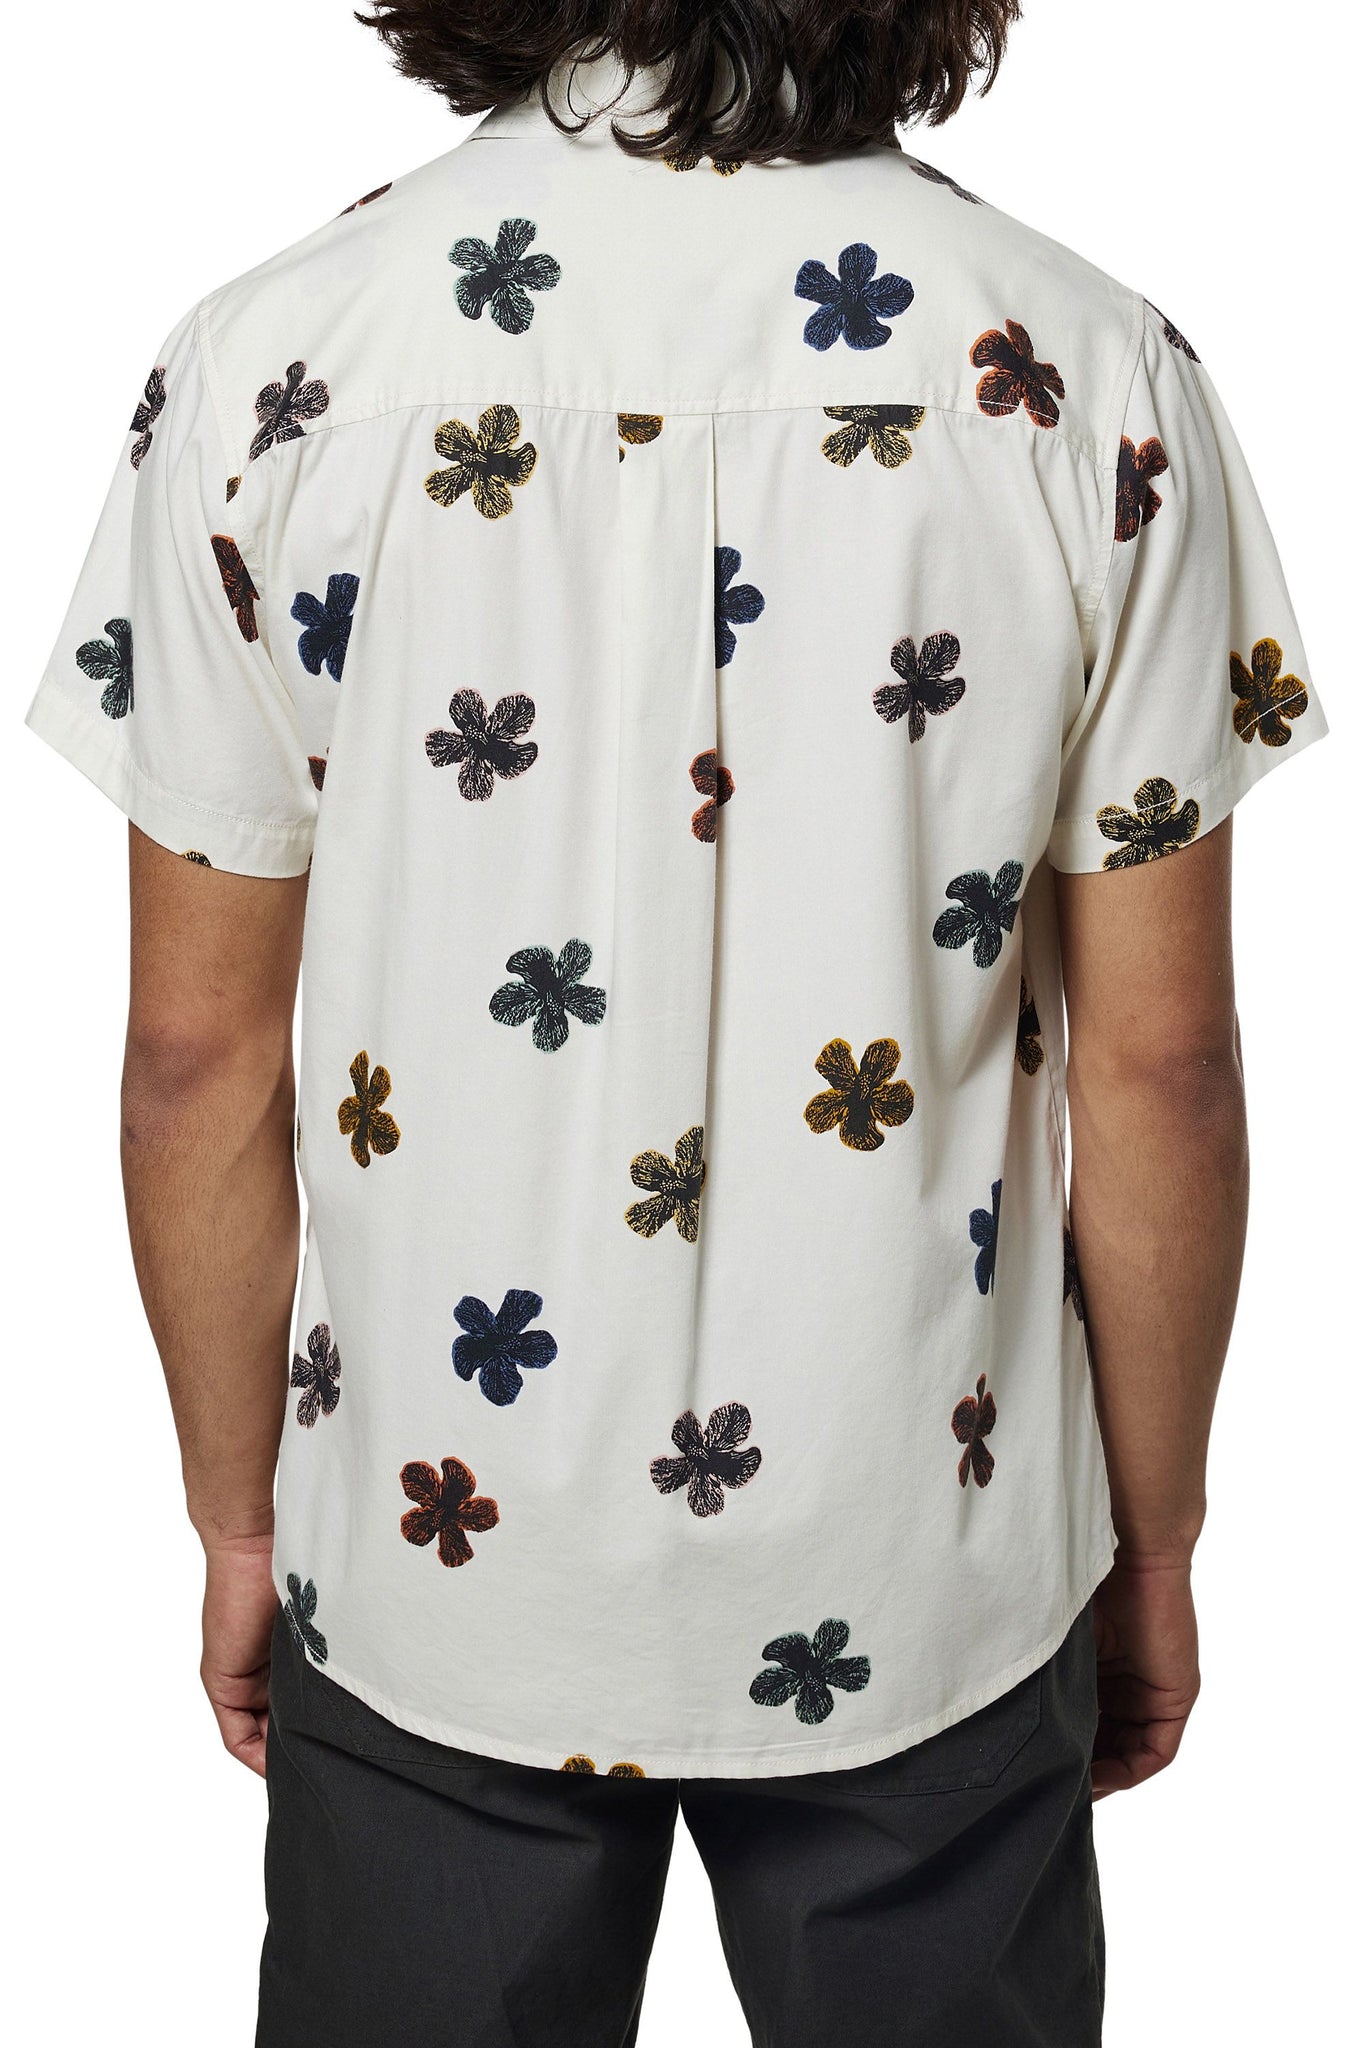 Katin USA - Dreamboat Shirt - all things being eco chilliwack canada - men's organic cotton clothing and accessories store - eco friendly fashion